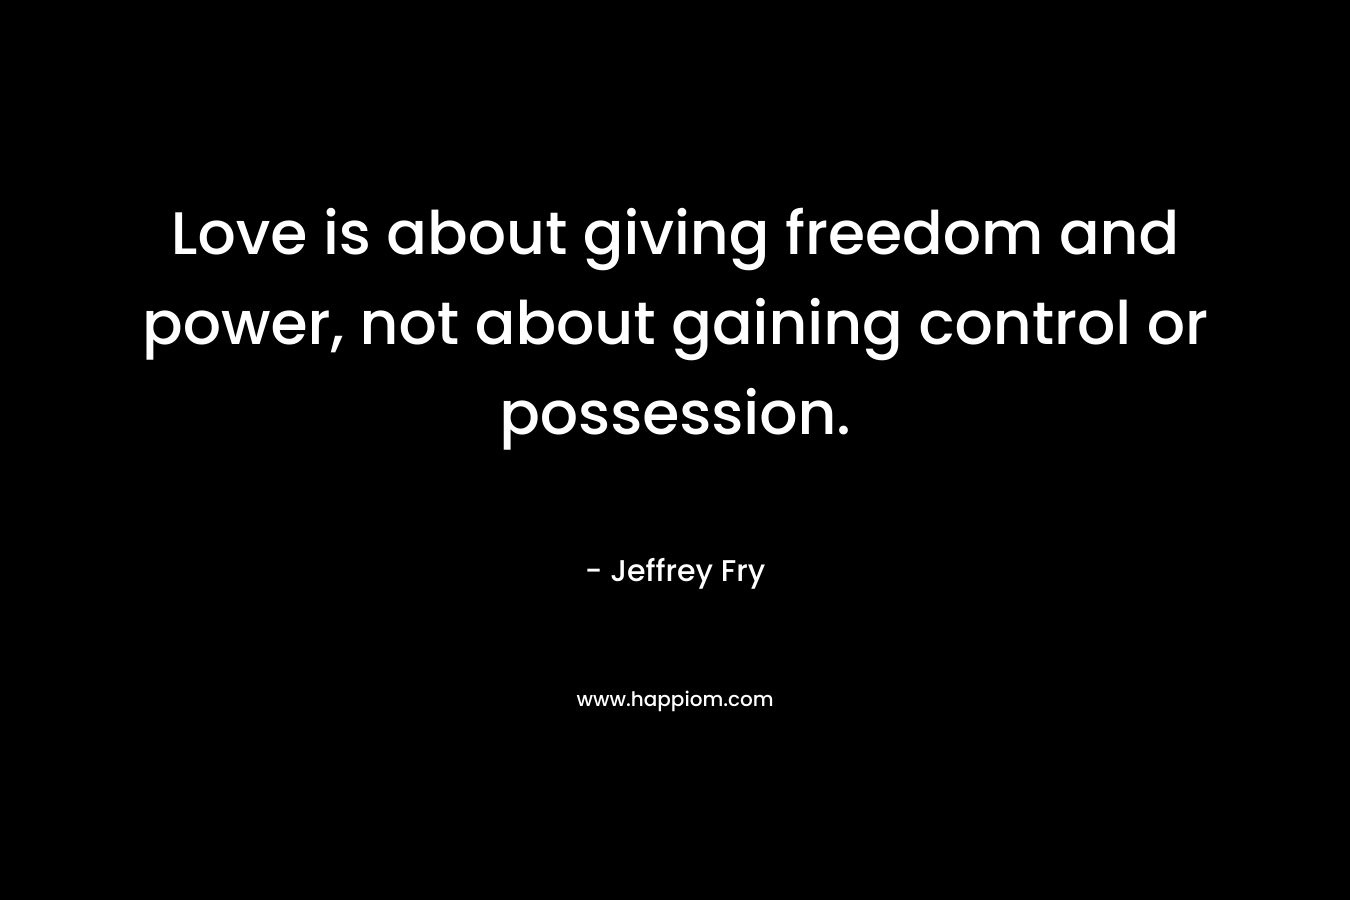 Love is about giving freedom and power, not about gaining control or possession.